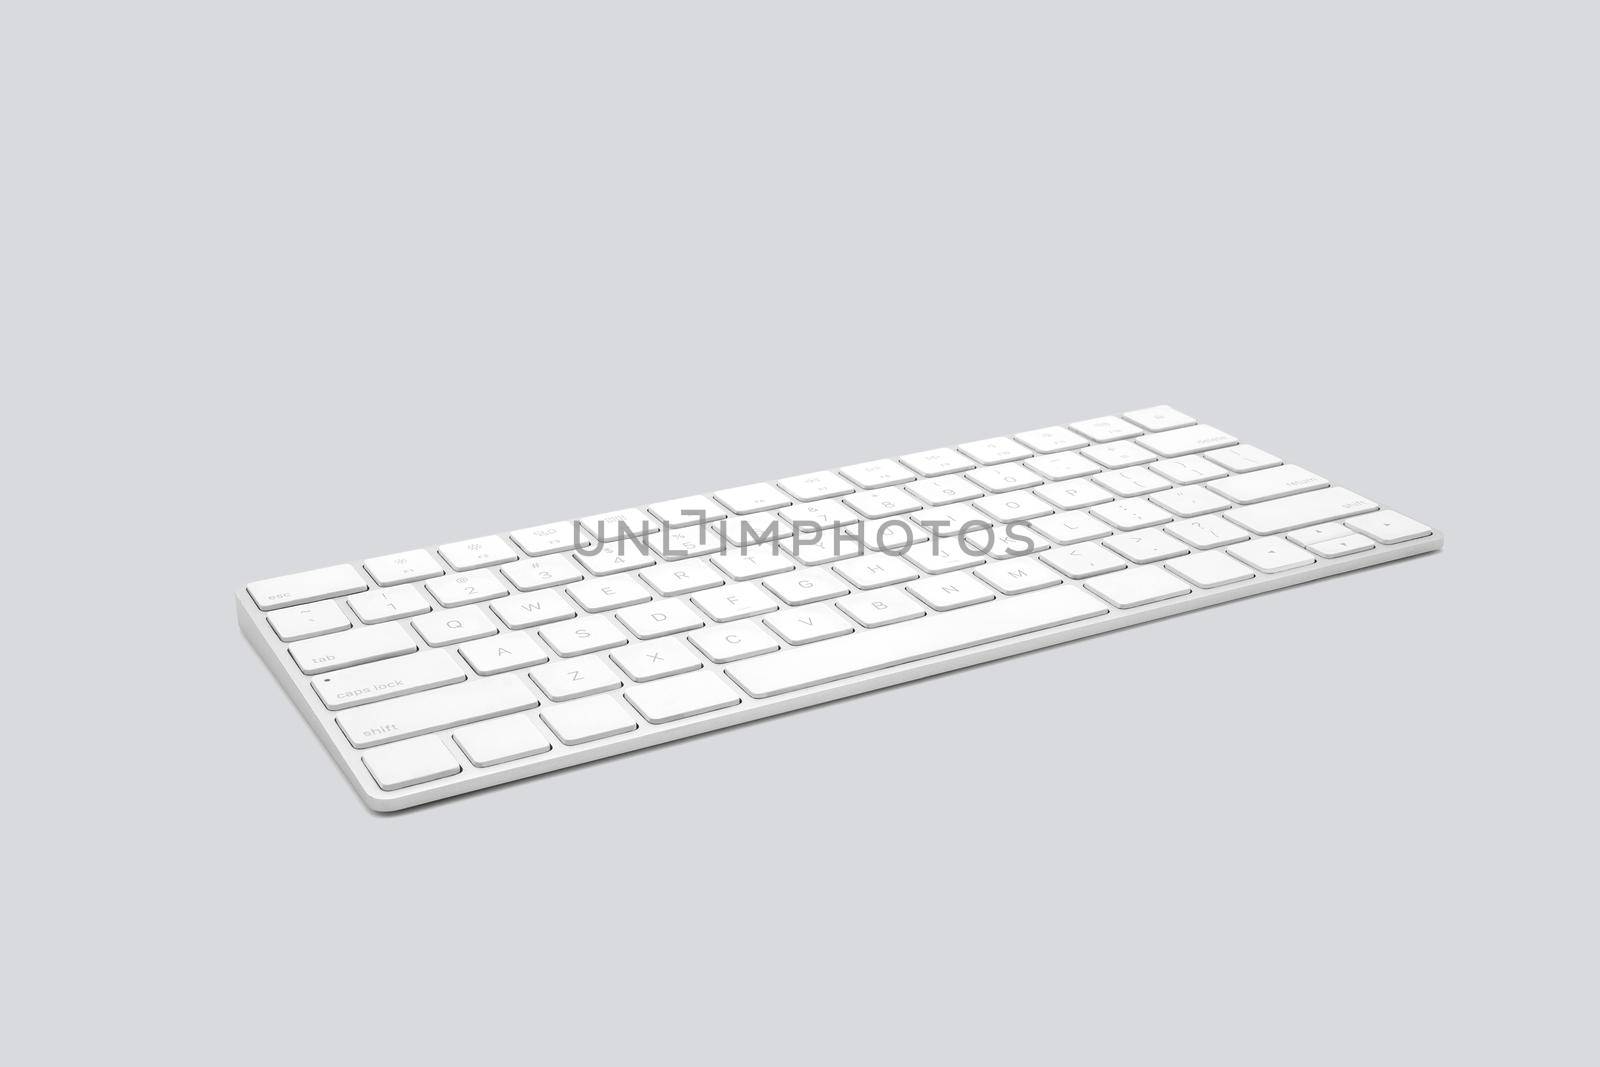 Keyboard computer isolated on white background, accessory and equipment electronic, technology digital. by nnudoo